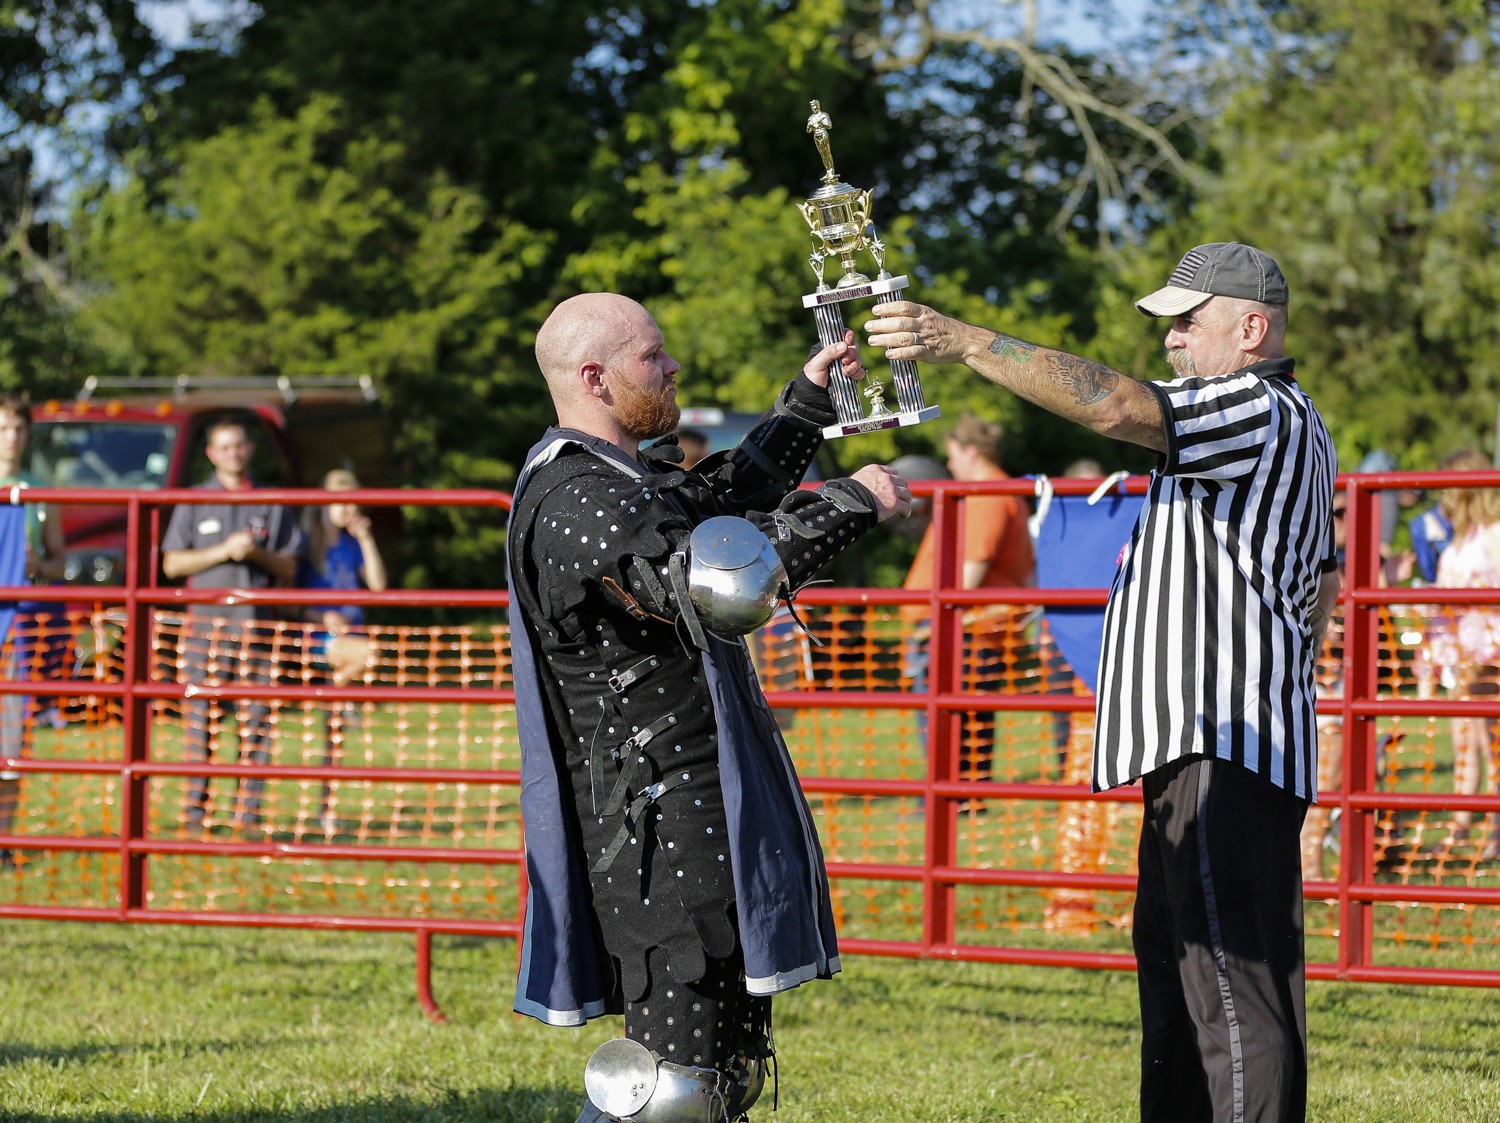 Some of the knights were presented trophies and awards in different areas of armored combat at the end of the event.